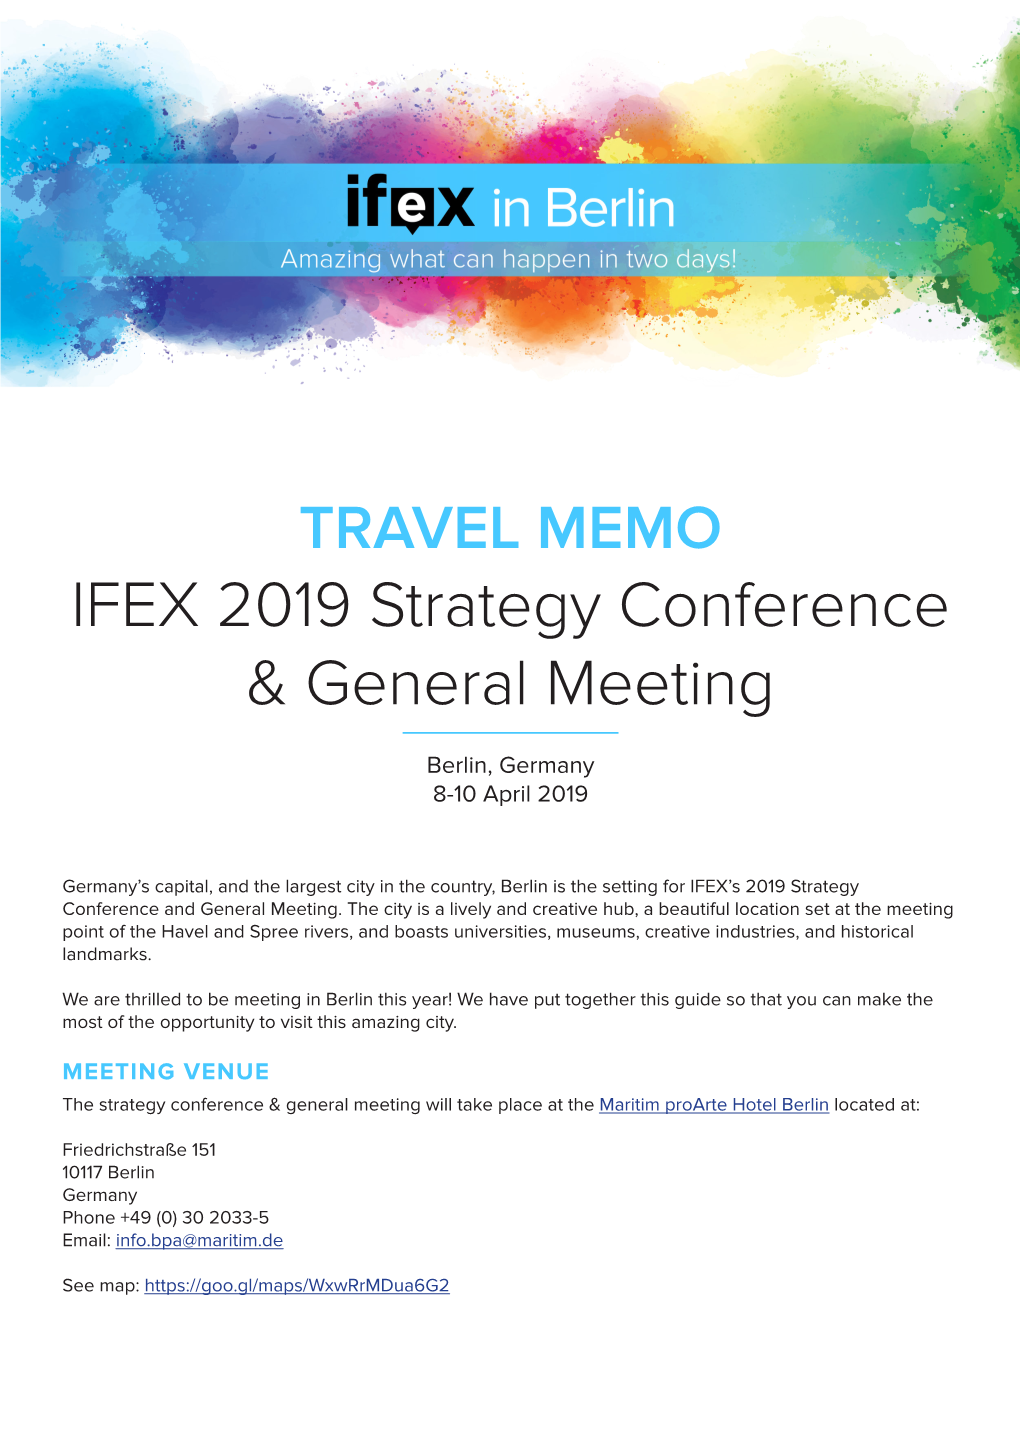 IFEX 2019 Strategy Conference & General Meeting